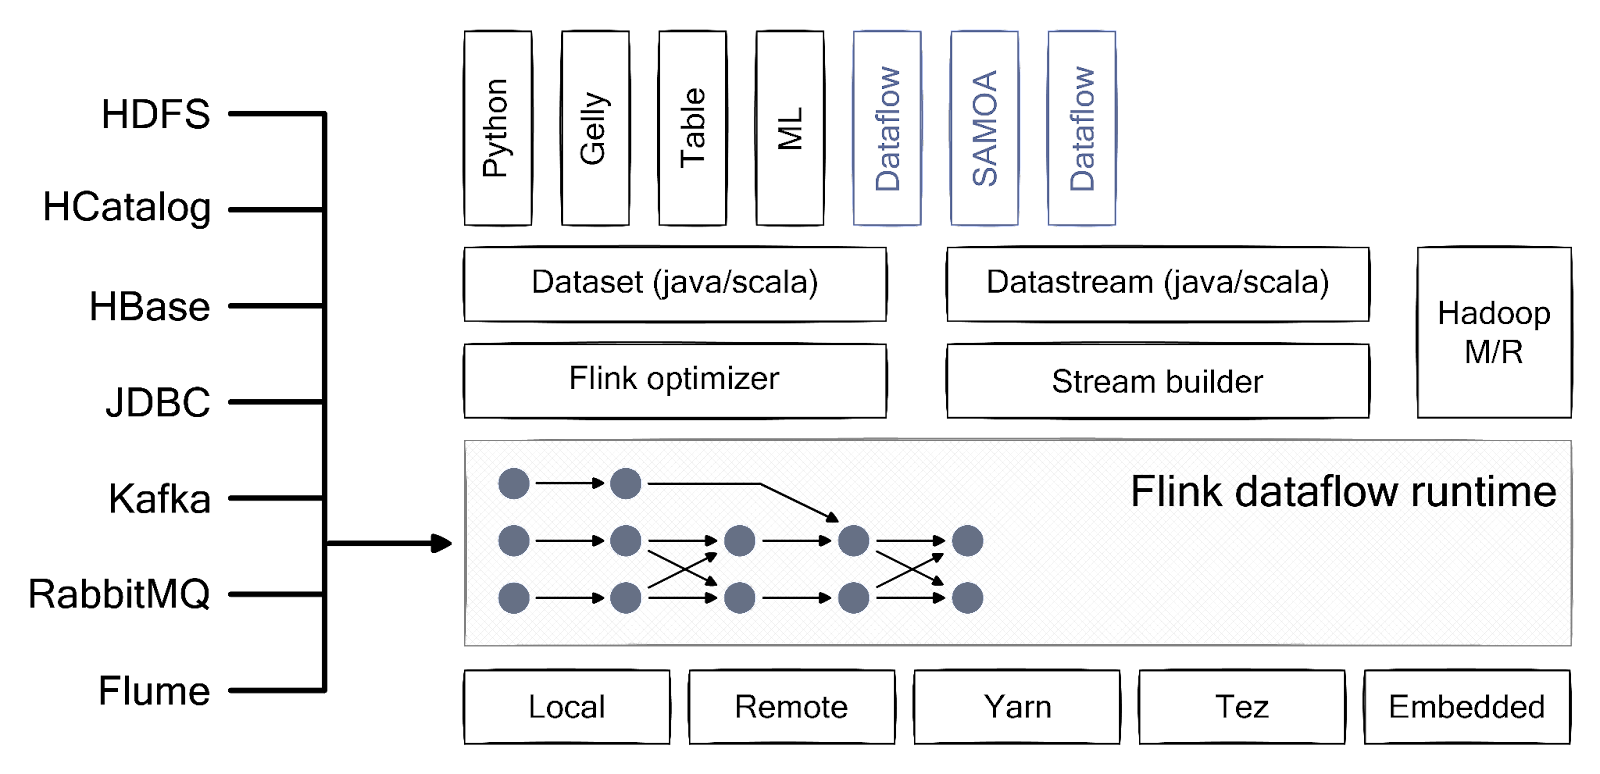 Overview of Flink’s architecture